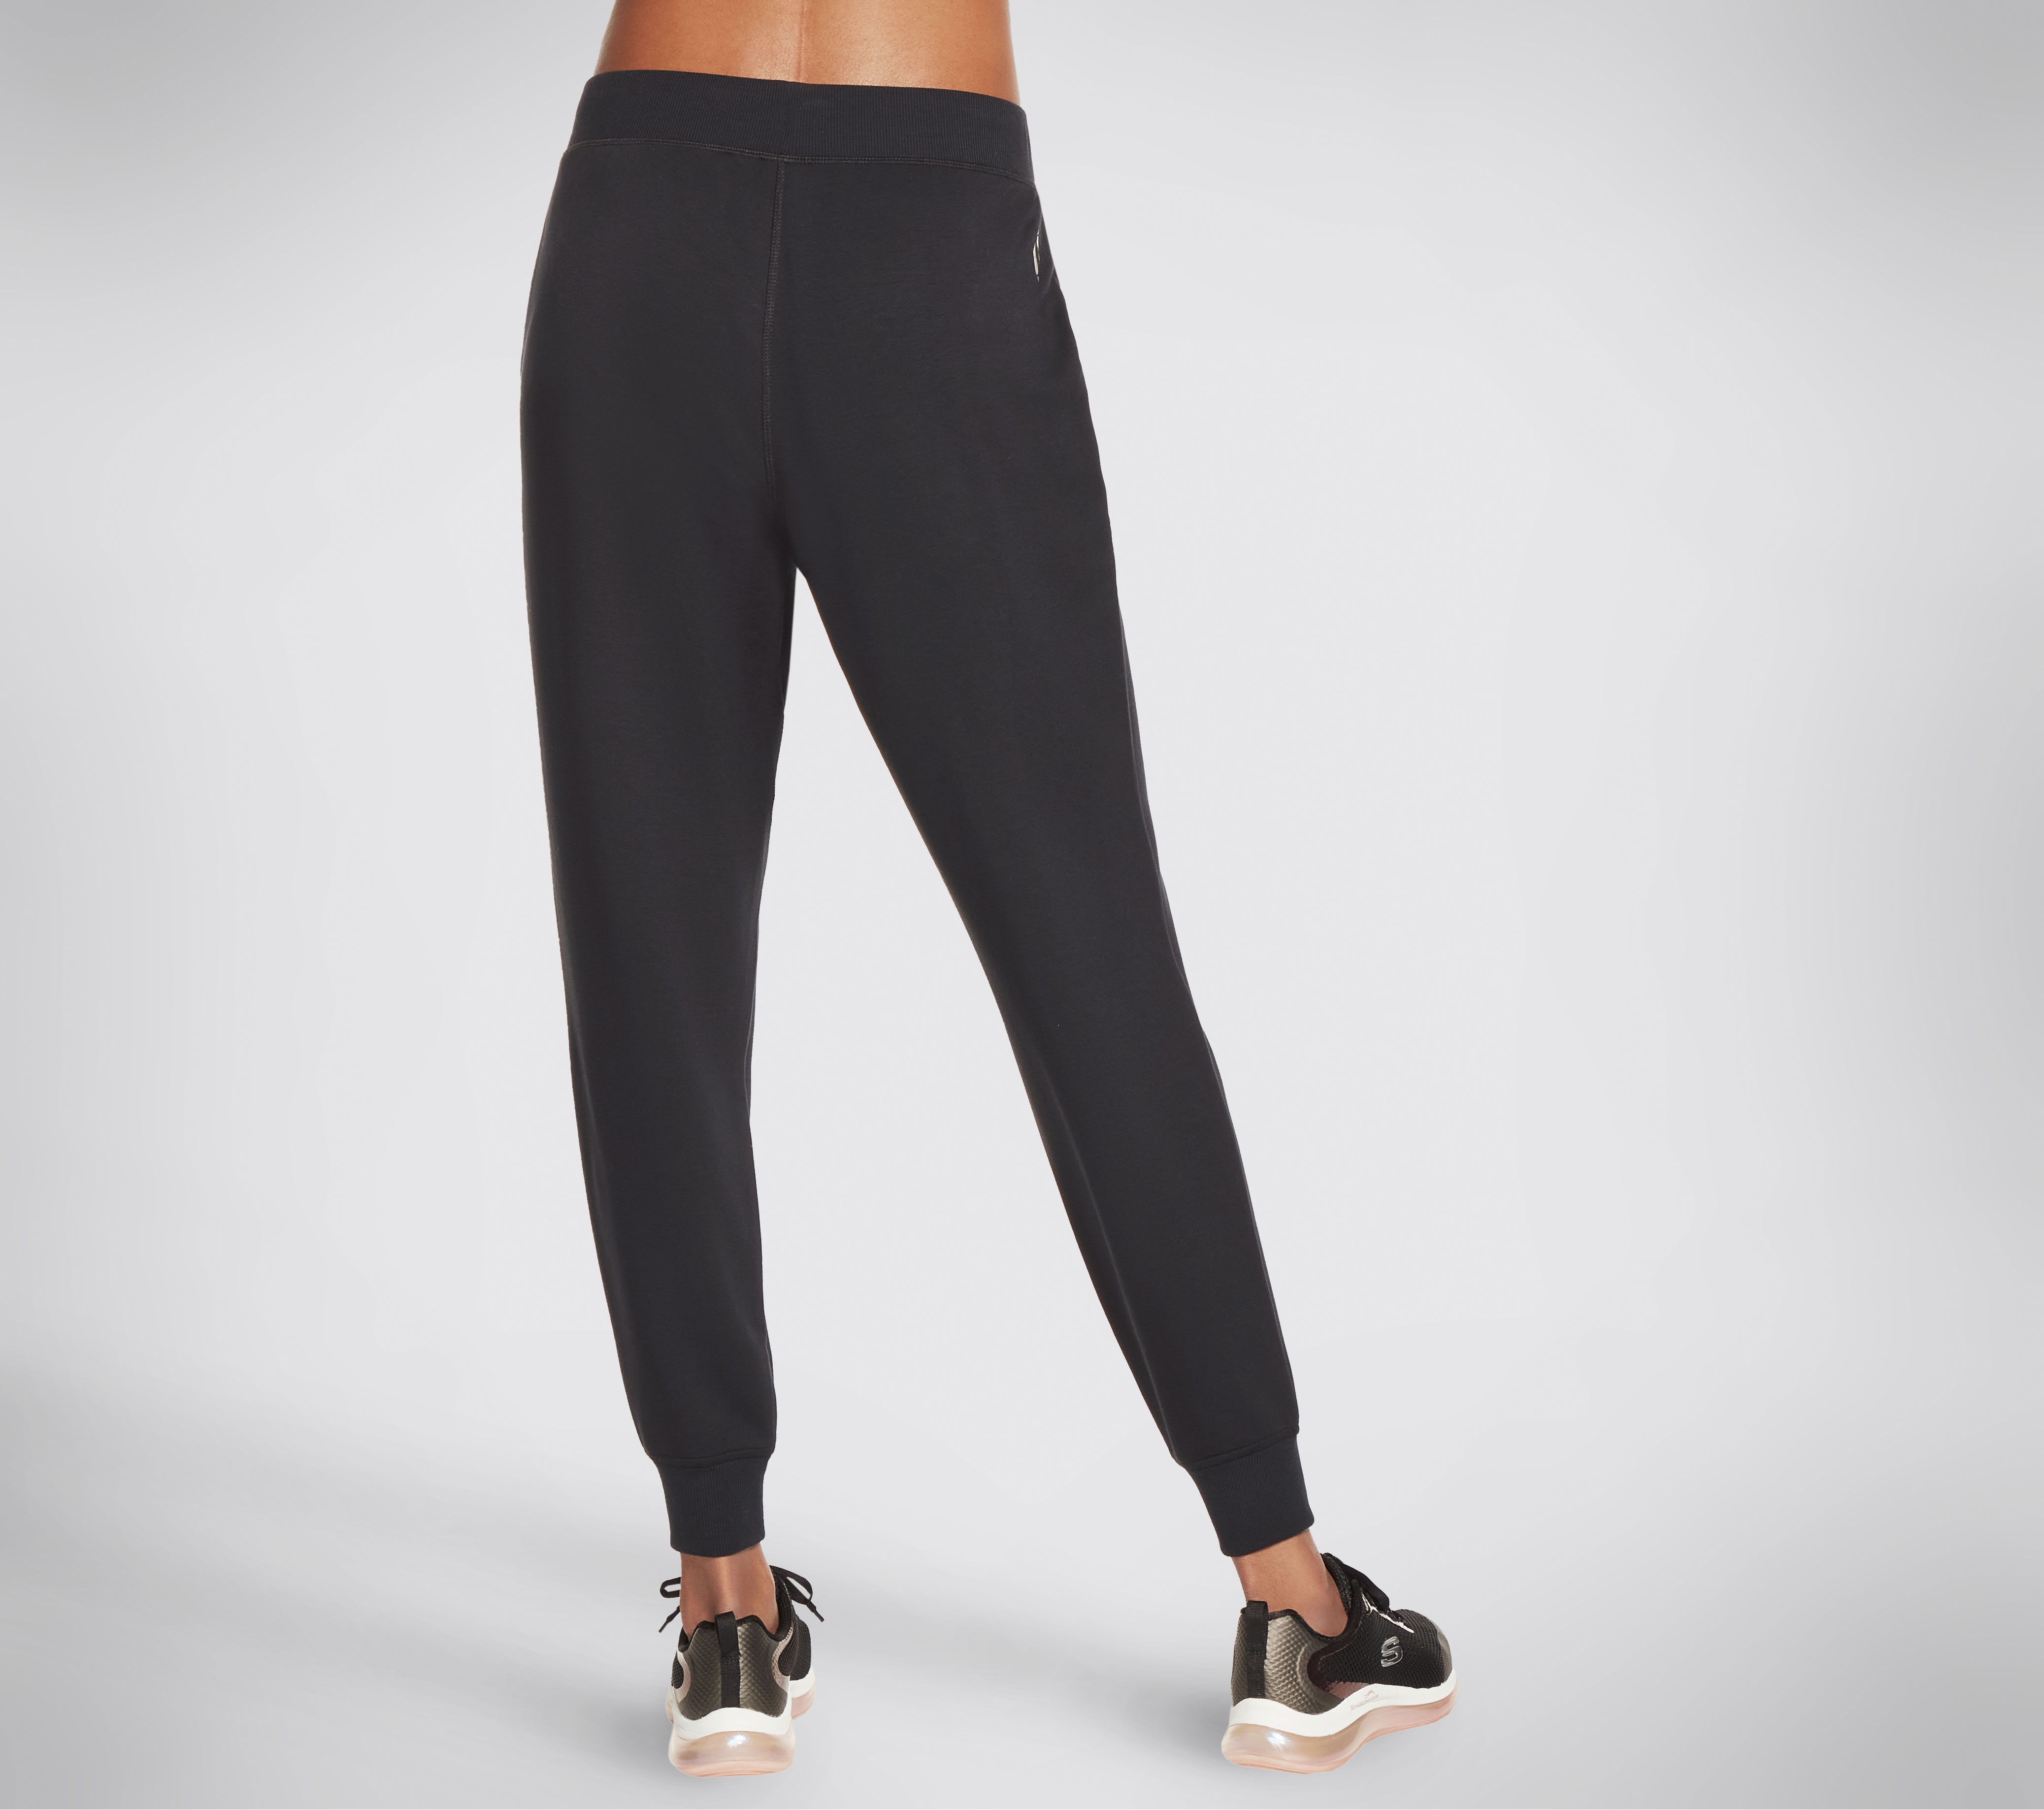 Shop the SKECHLUXE Restful Jogger Pant